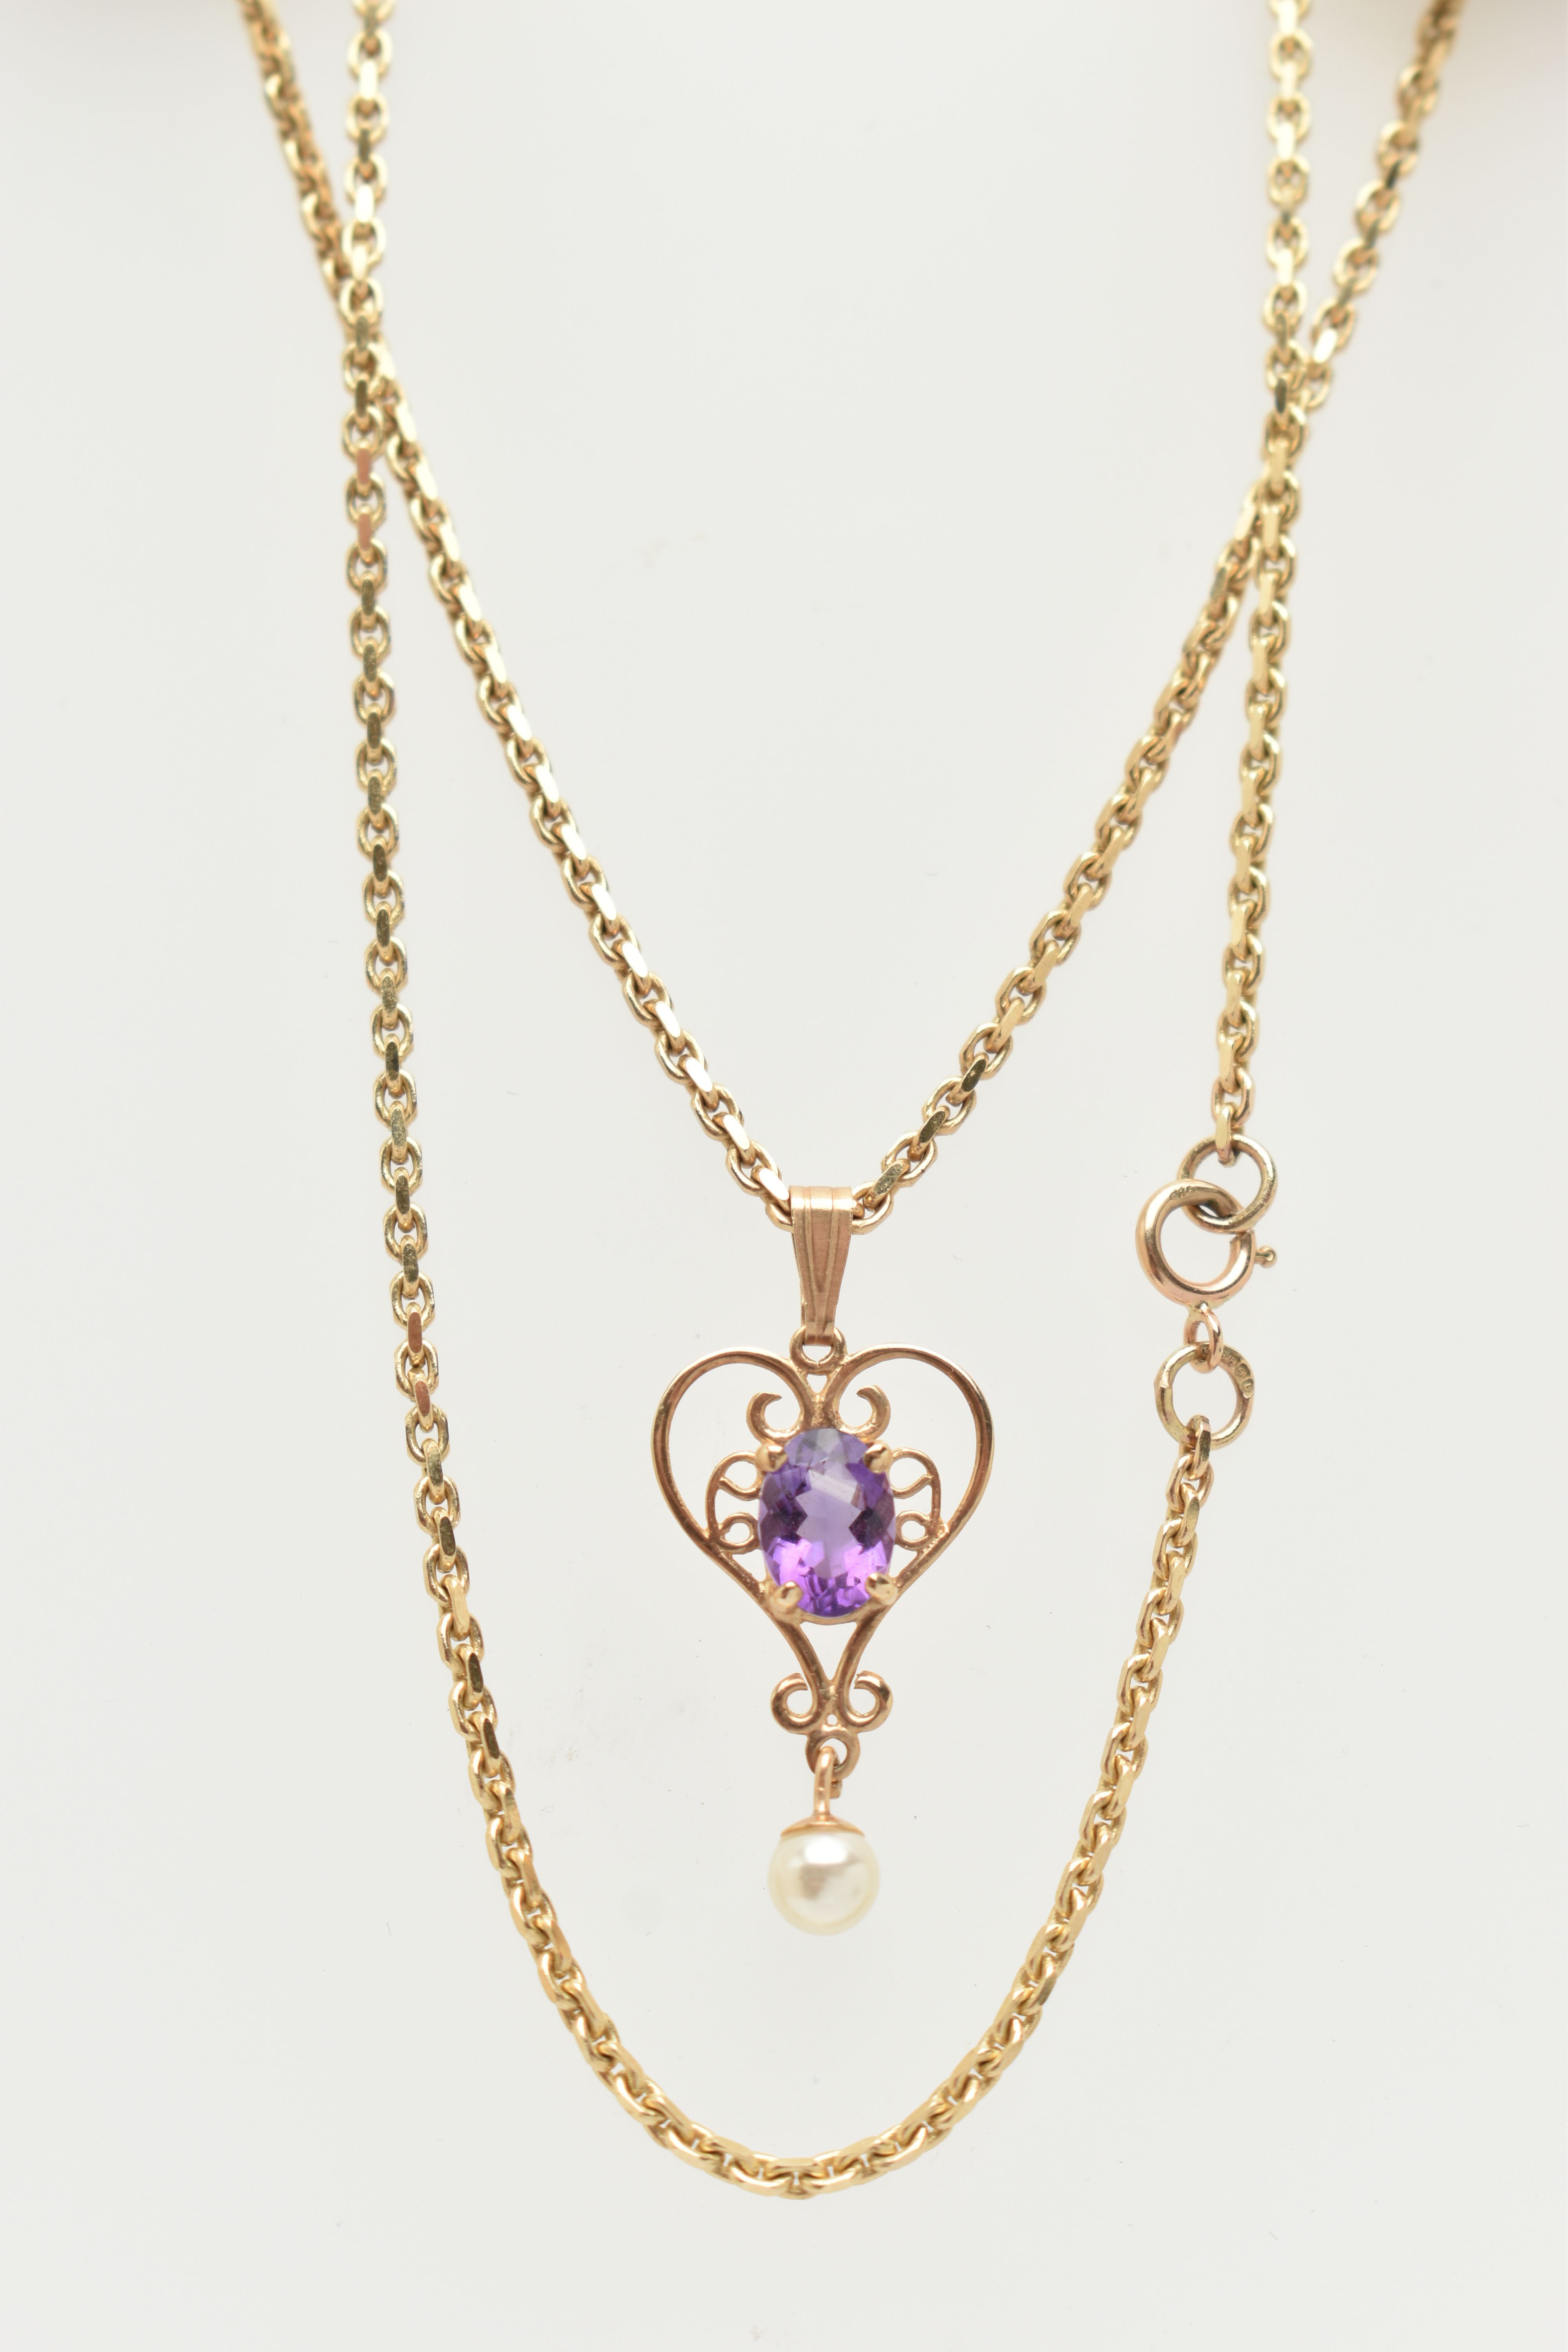 A 9CT GOLD PENDANT NECKLACE, heart shape scrolling pendant set with an oval cut amethyst four claw - Image 2 of 4